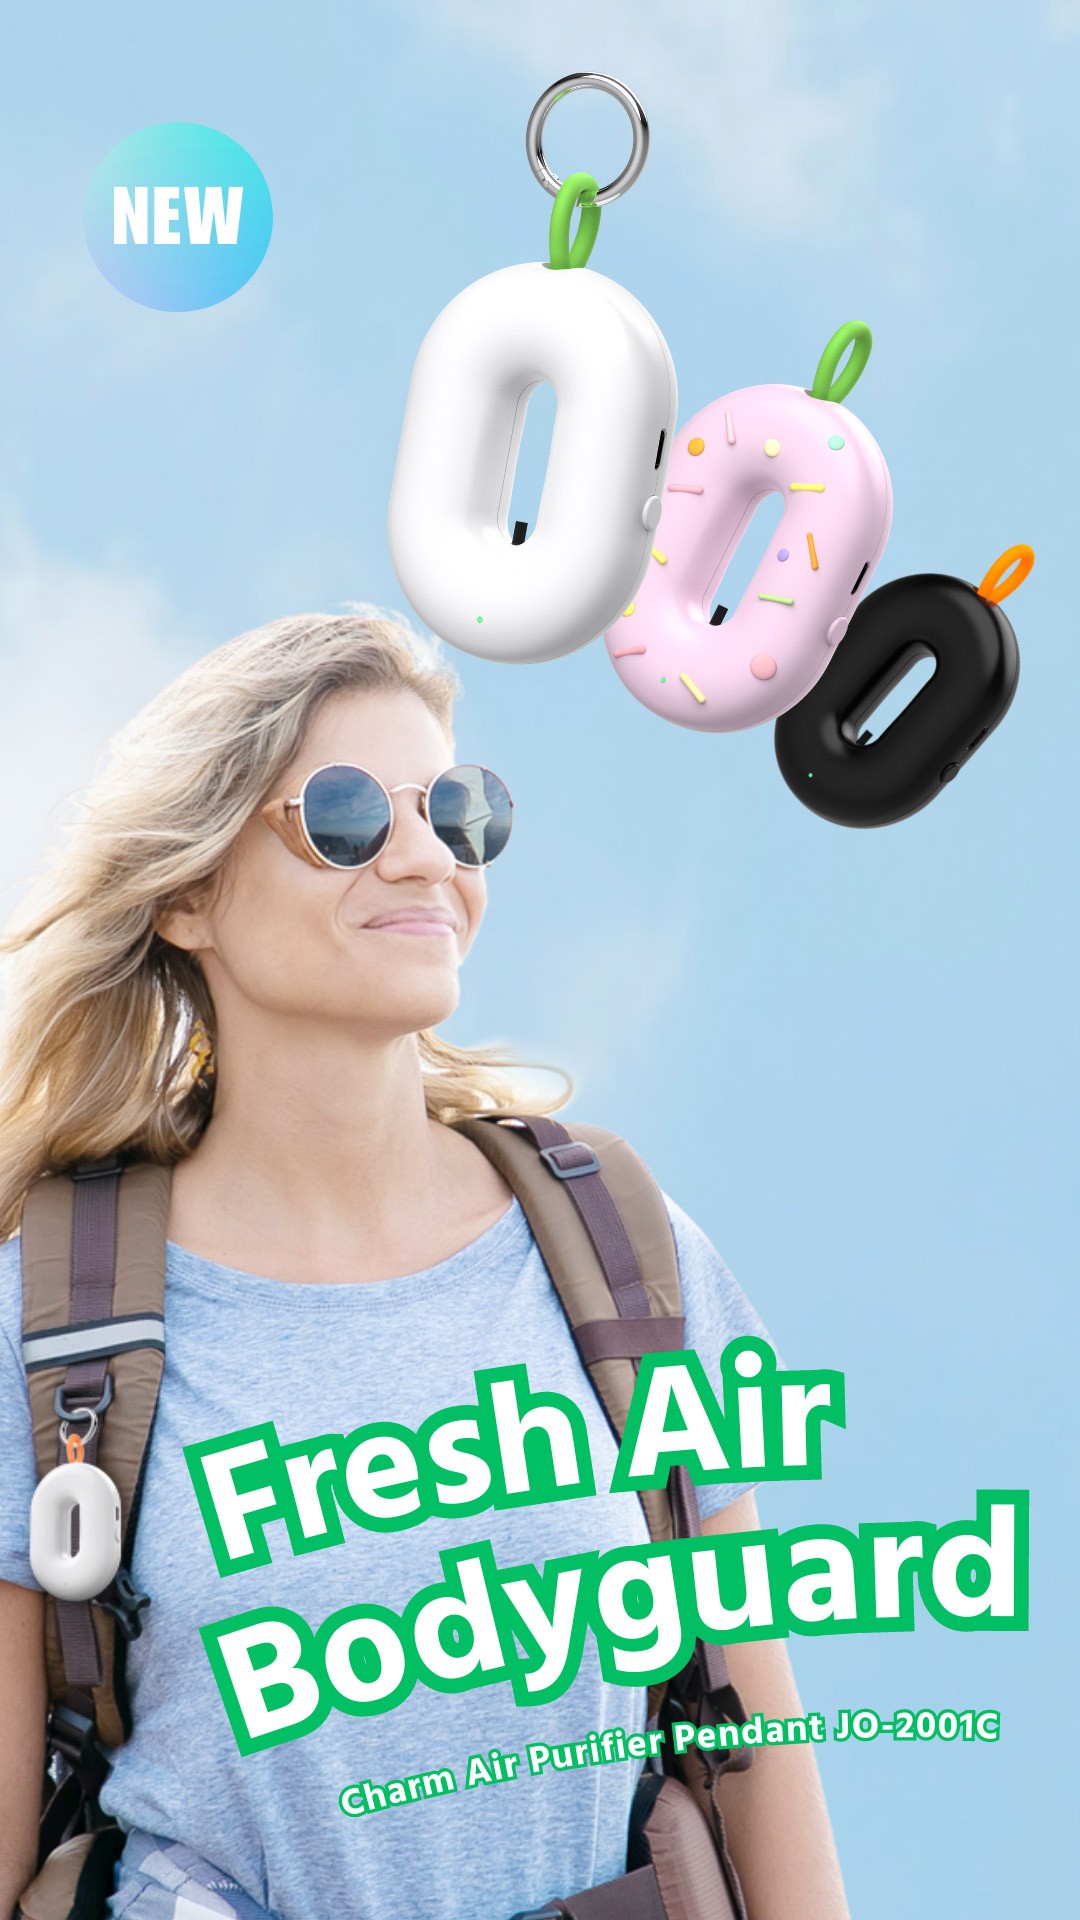 IONKINI Wearable Portable Charm Air Purifier Pendant JO-2001C for Bags, Backpacks, Keychains - New Products, New Arrival, New Release